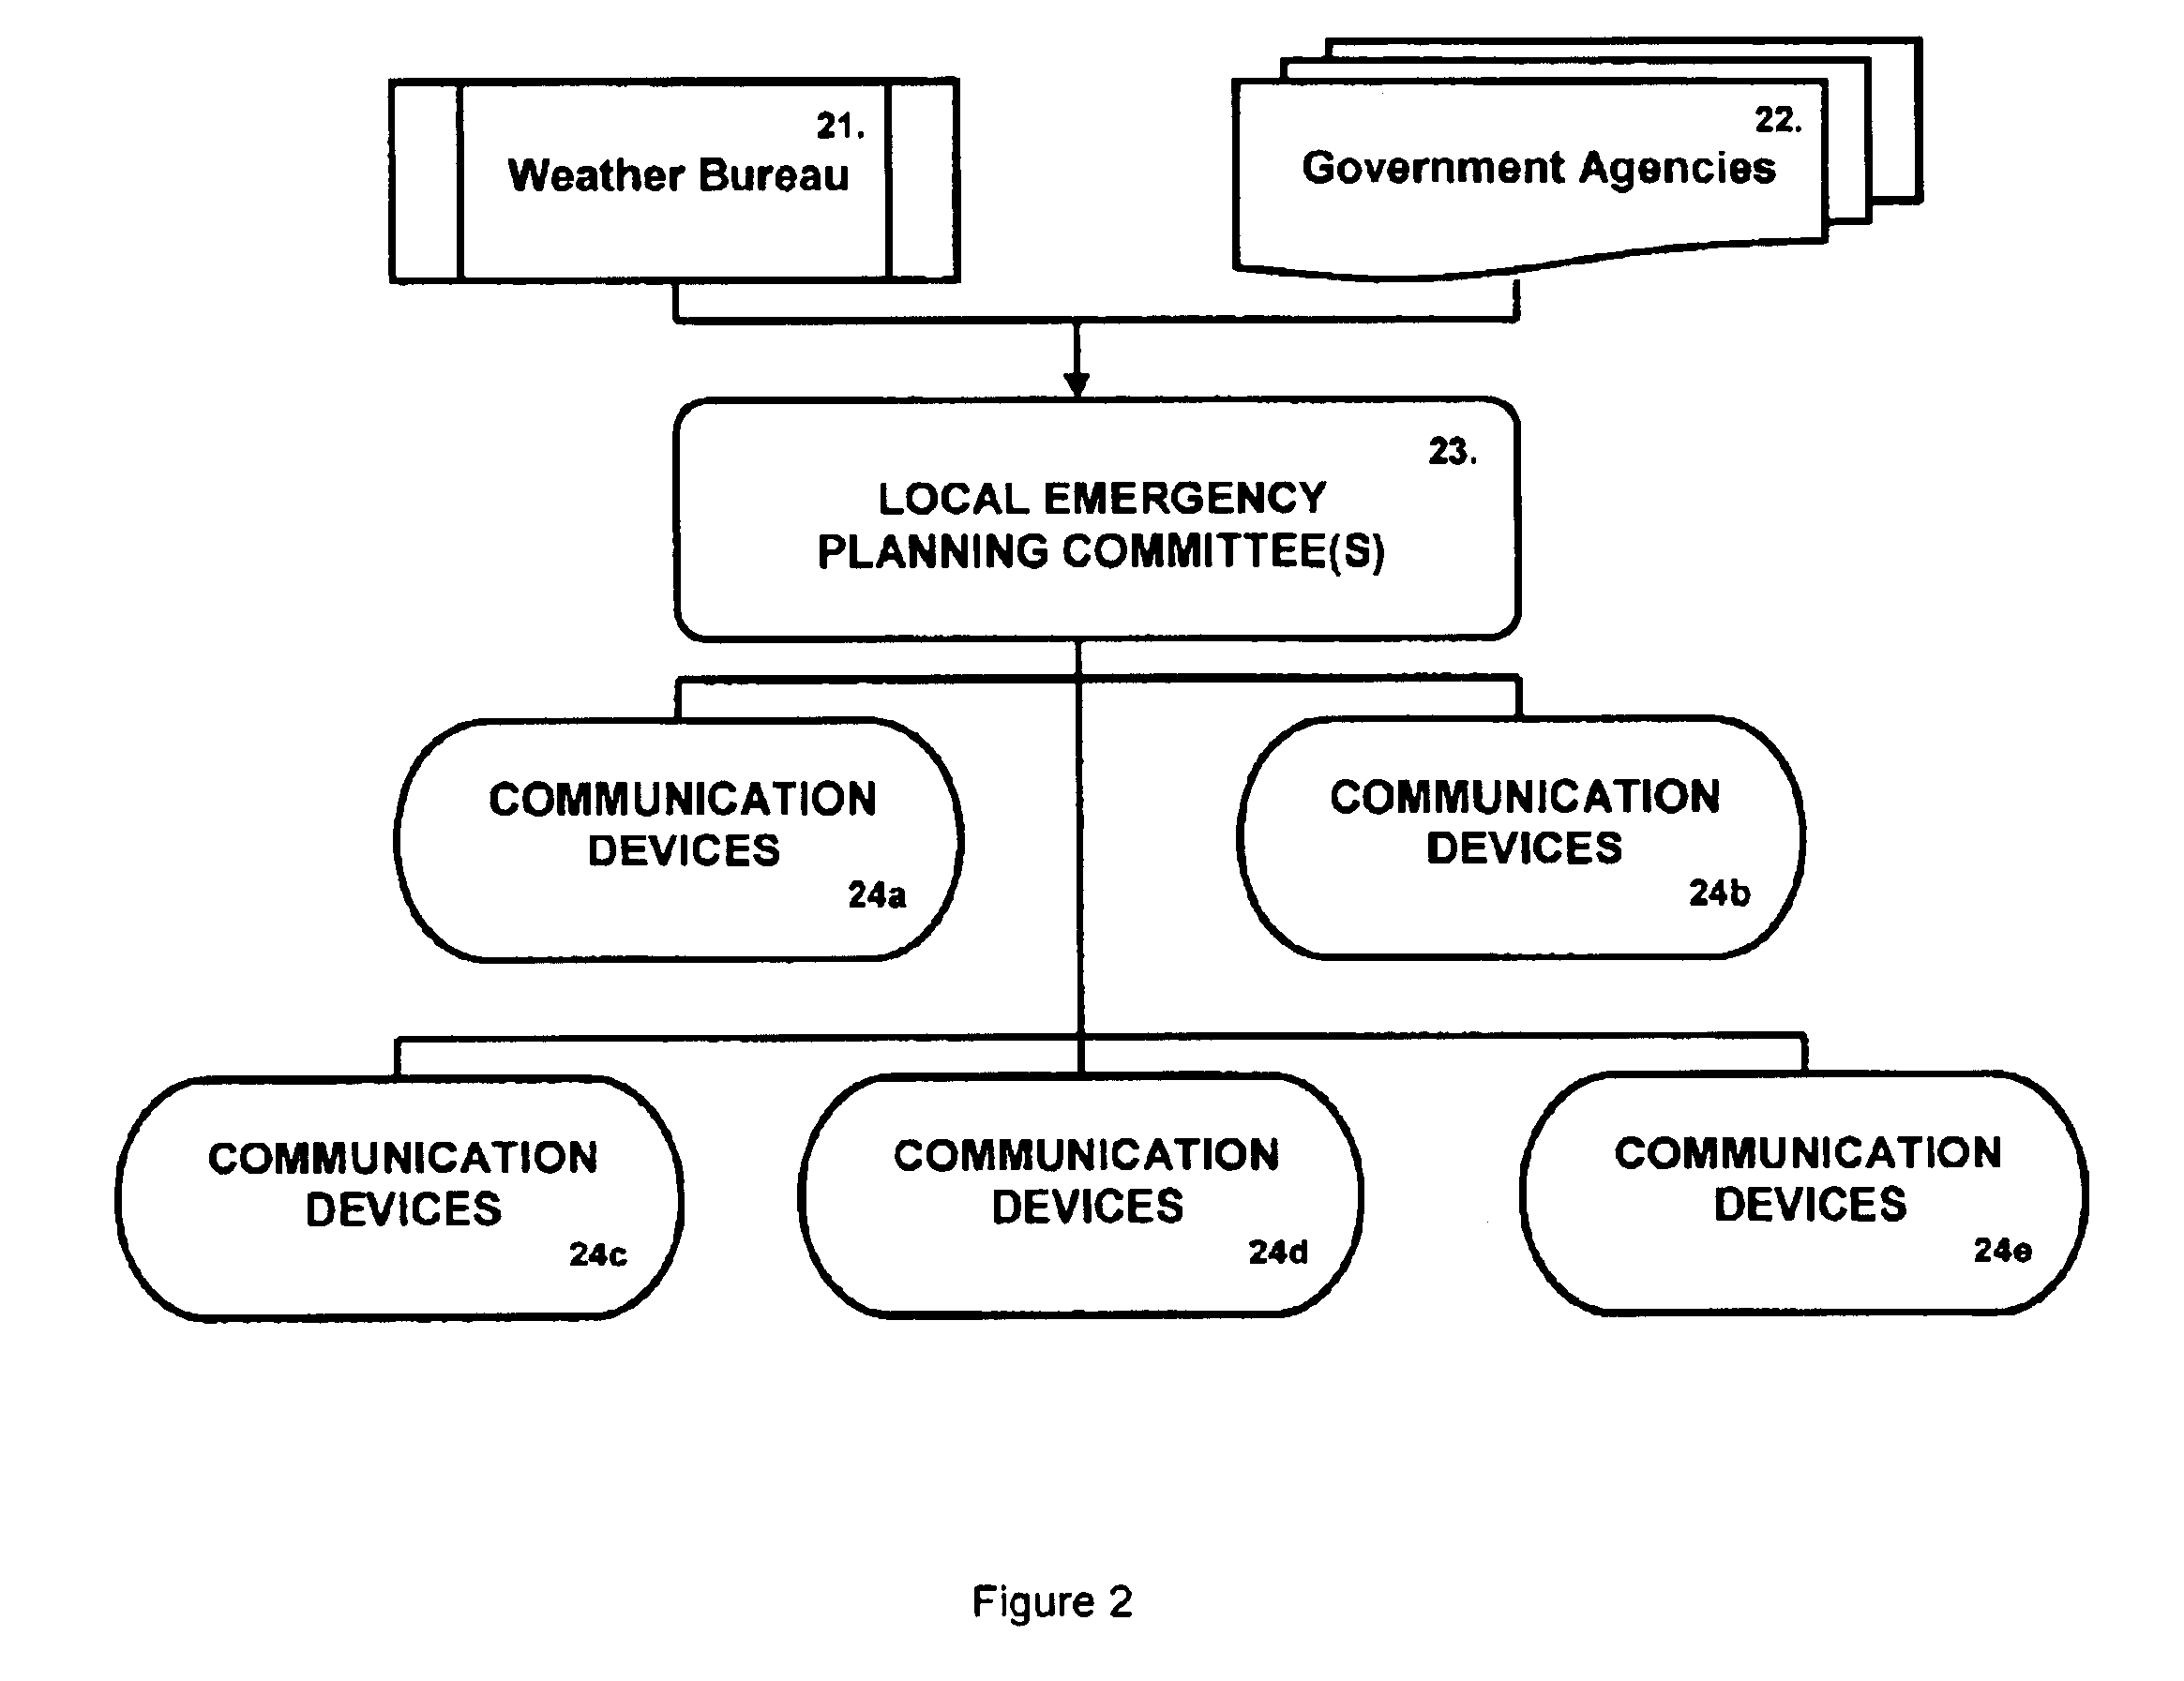 Method and apparatus for disseminating emergency warning information